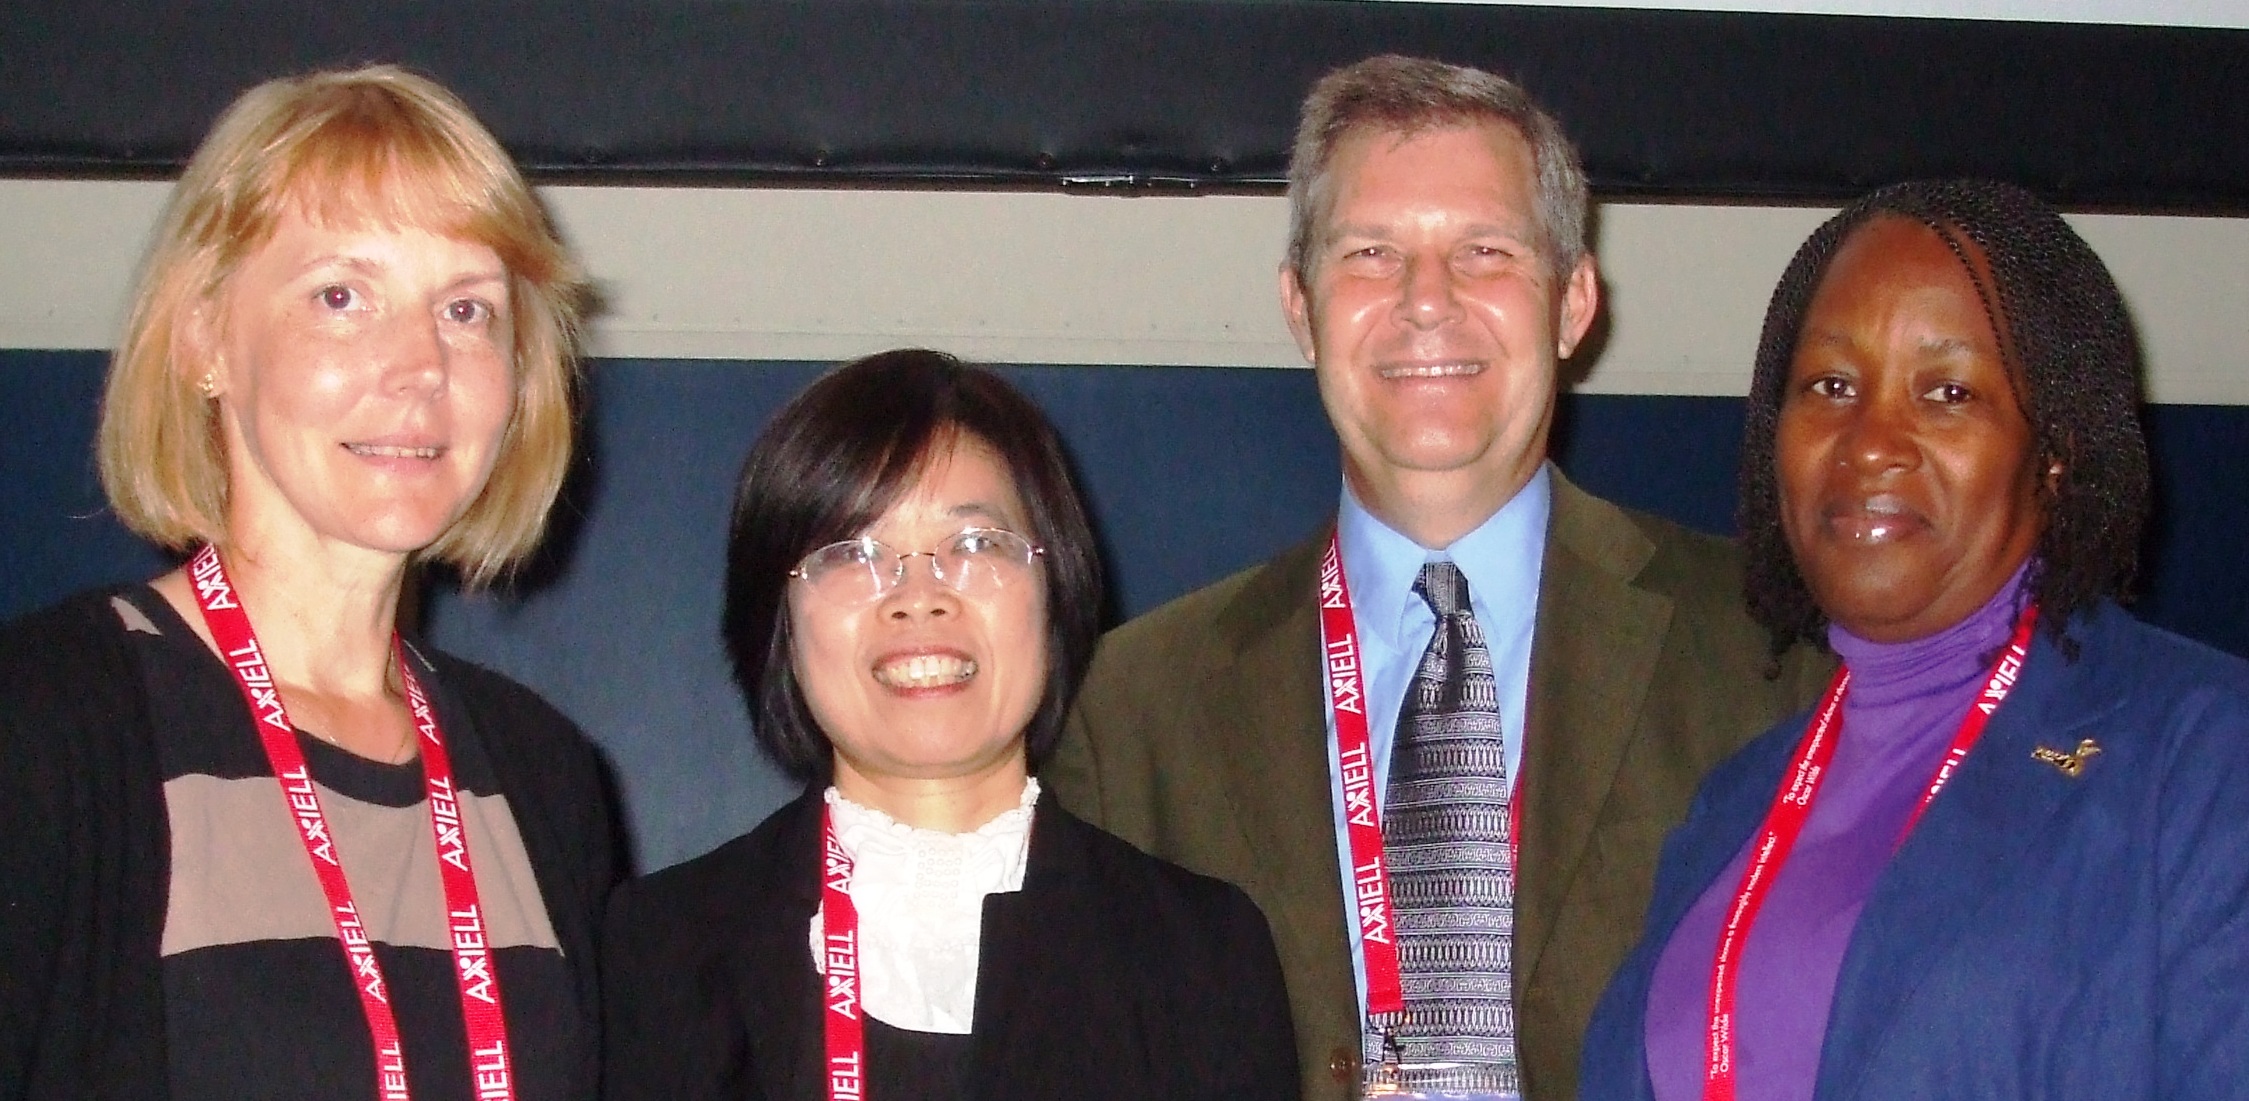 Promoting the Campaign for the World’s Libraries, Silvija Tret Jakova of Latvia, Li-Hsiang Lai of Taiwan, Michael Dowling of the American Library Association, and Claudette Thomas of Jamaica.